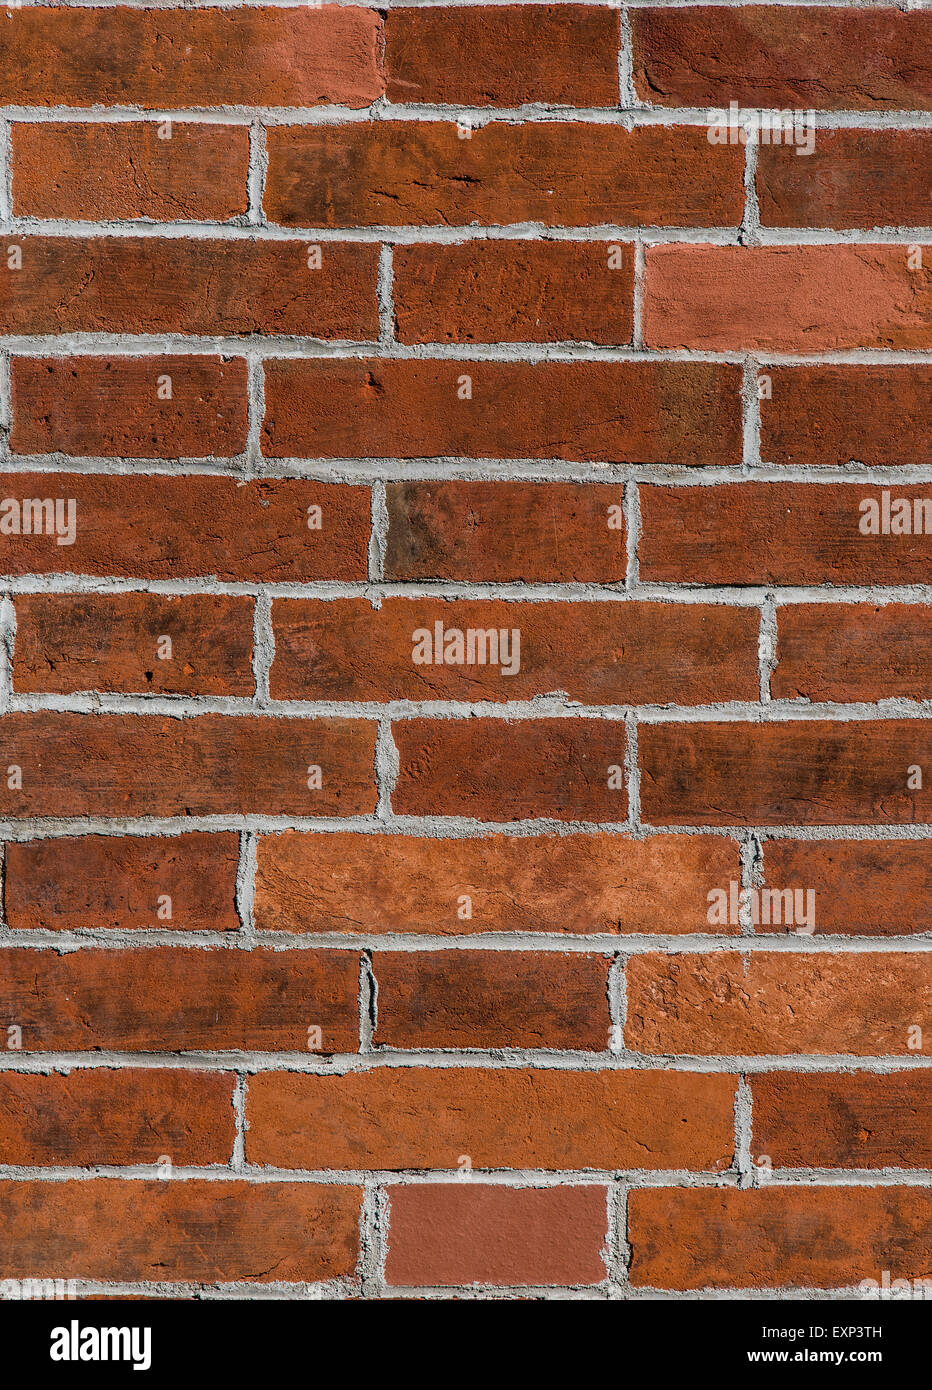 Red brick wall, detail Stock Photo